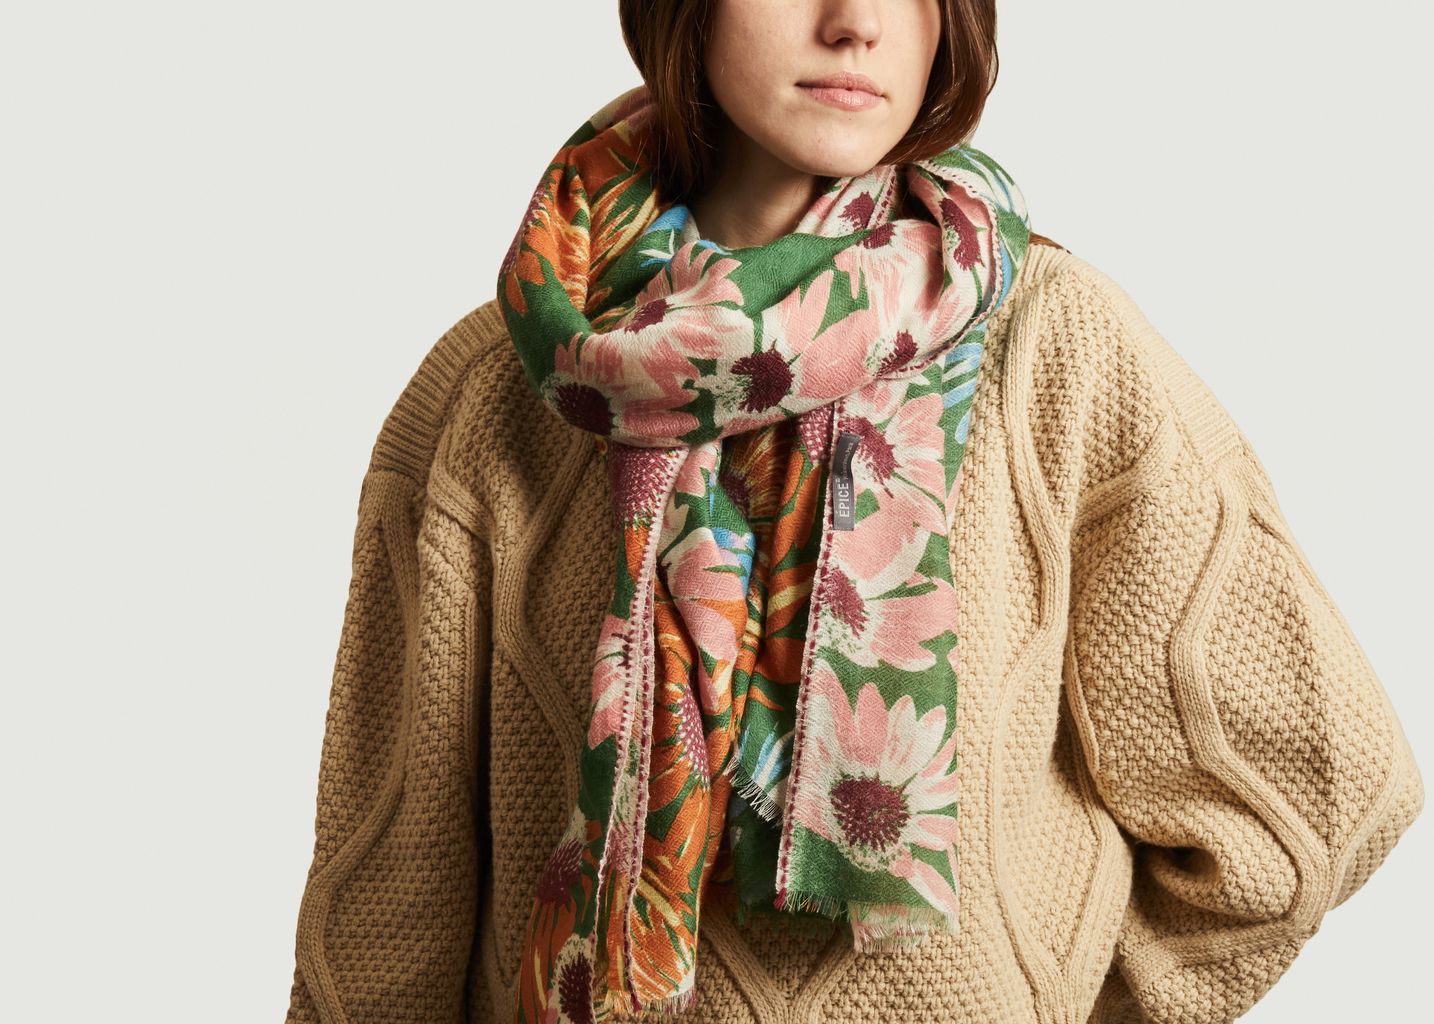 SW 2170 floral pattern wool and cashmere large stole - Epice